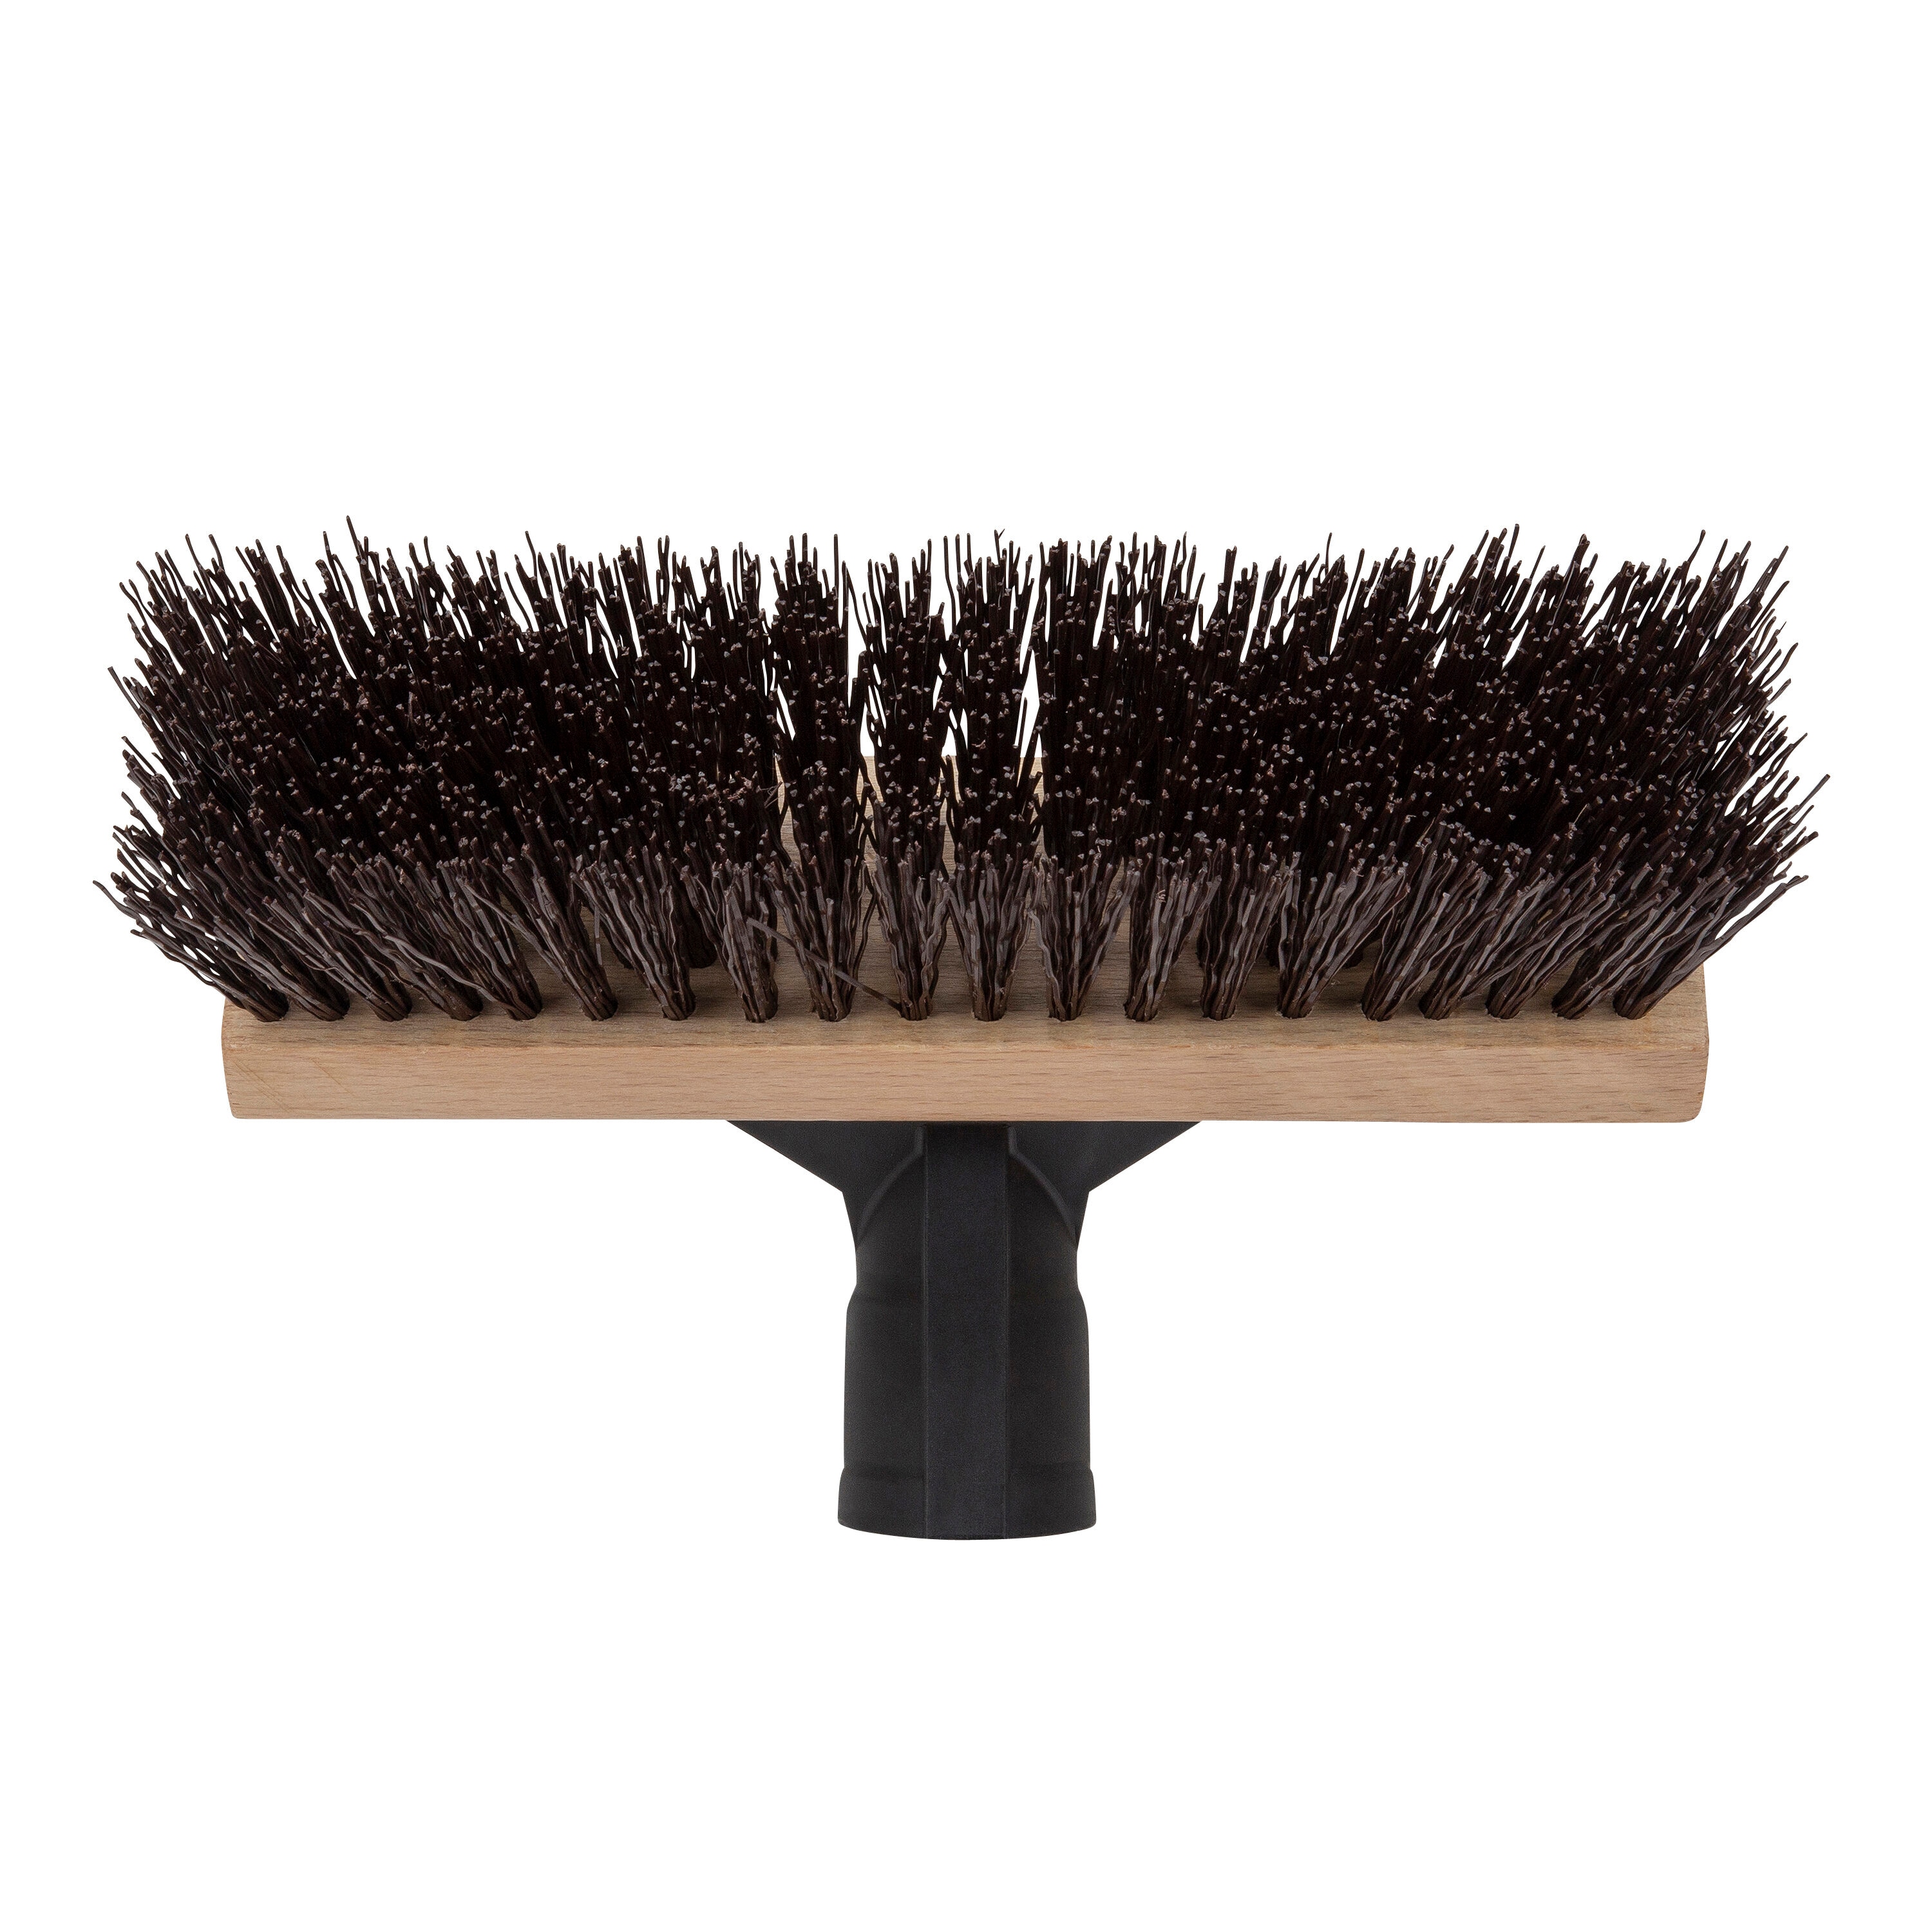 Libman 10-in Poly Fiber Stiff Deck Brush in the Deck Brushes department at